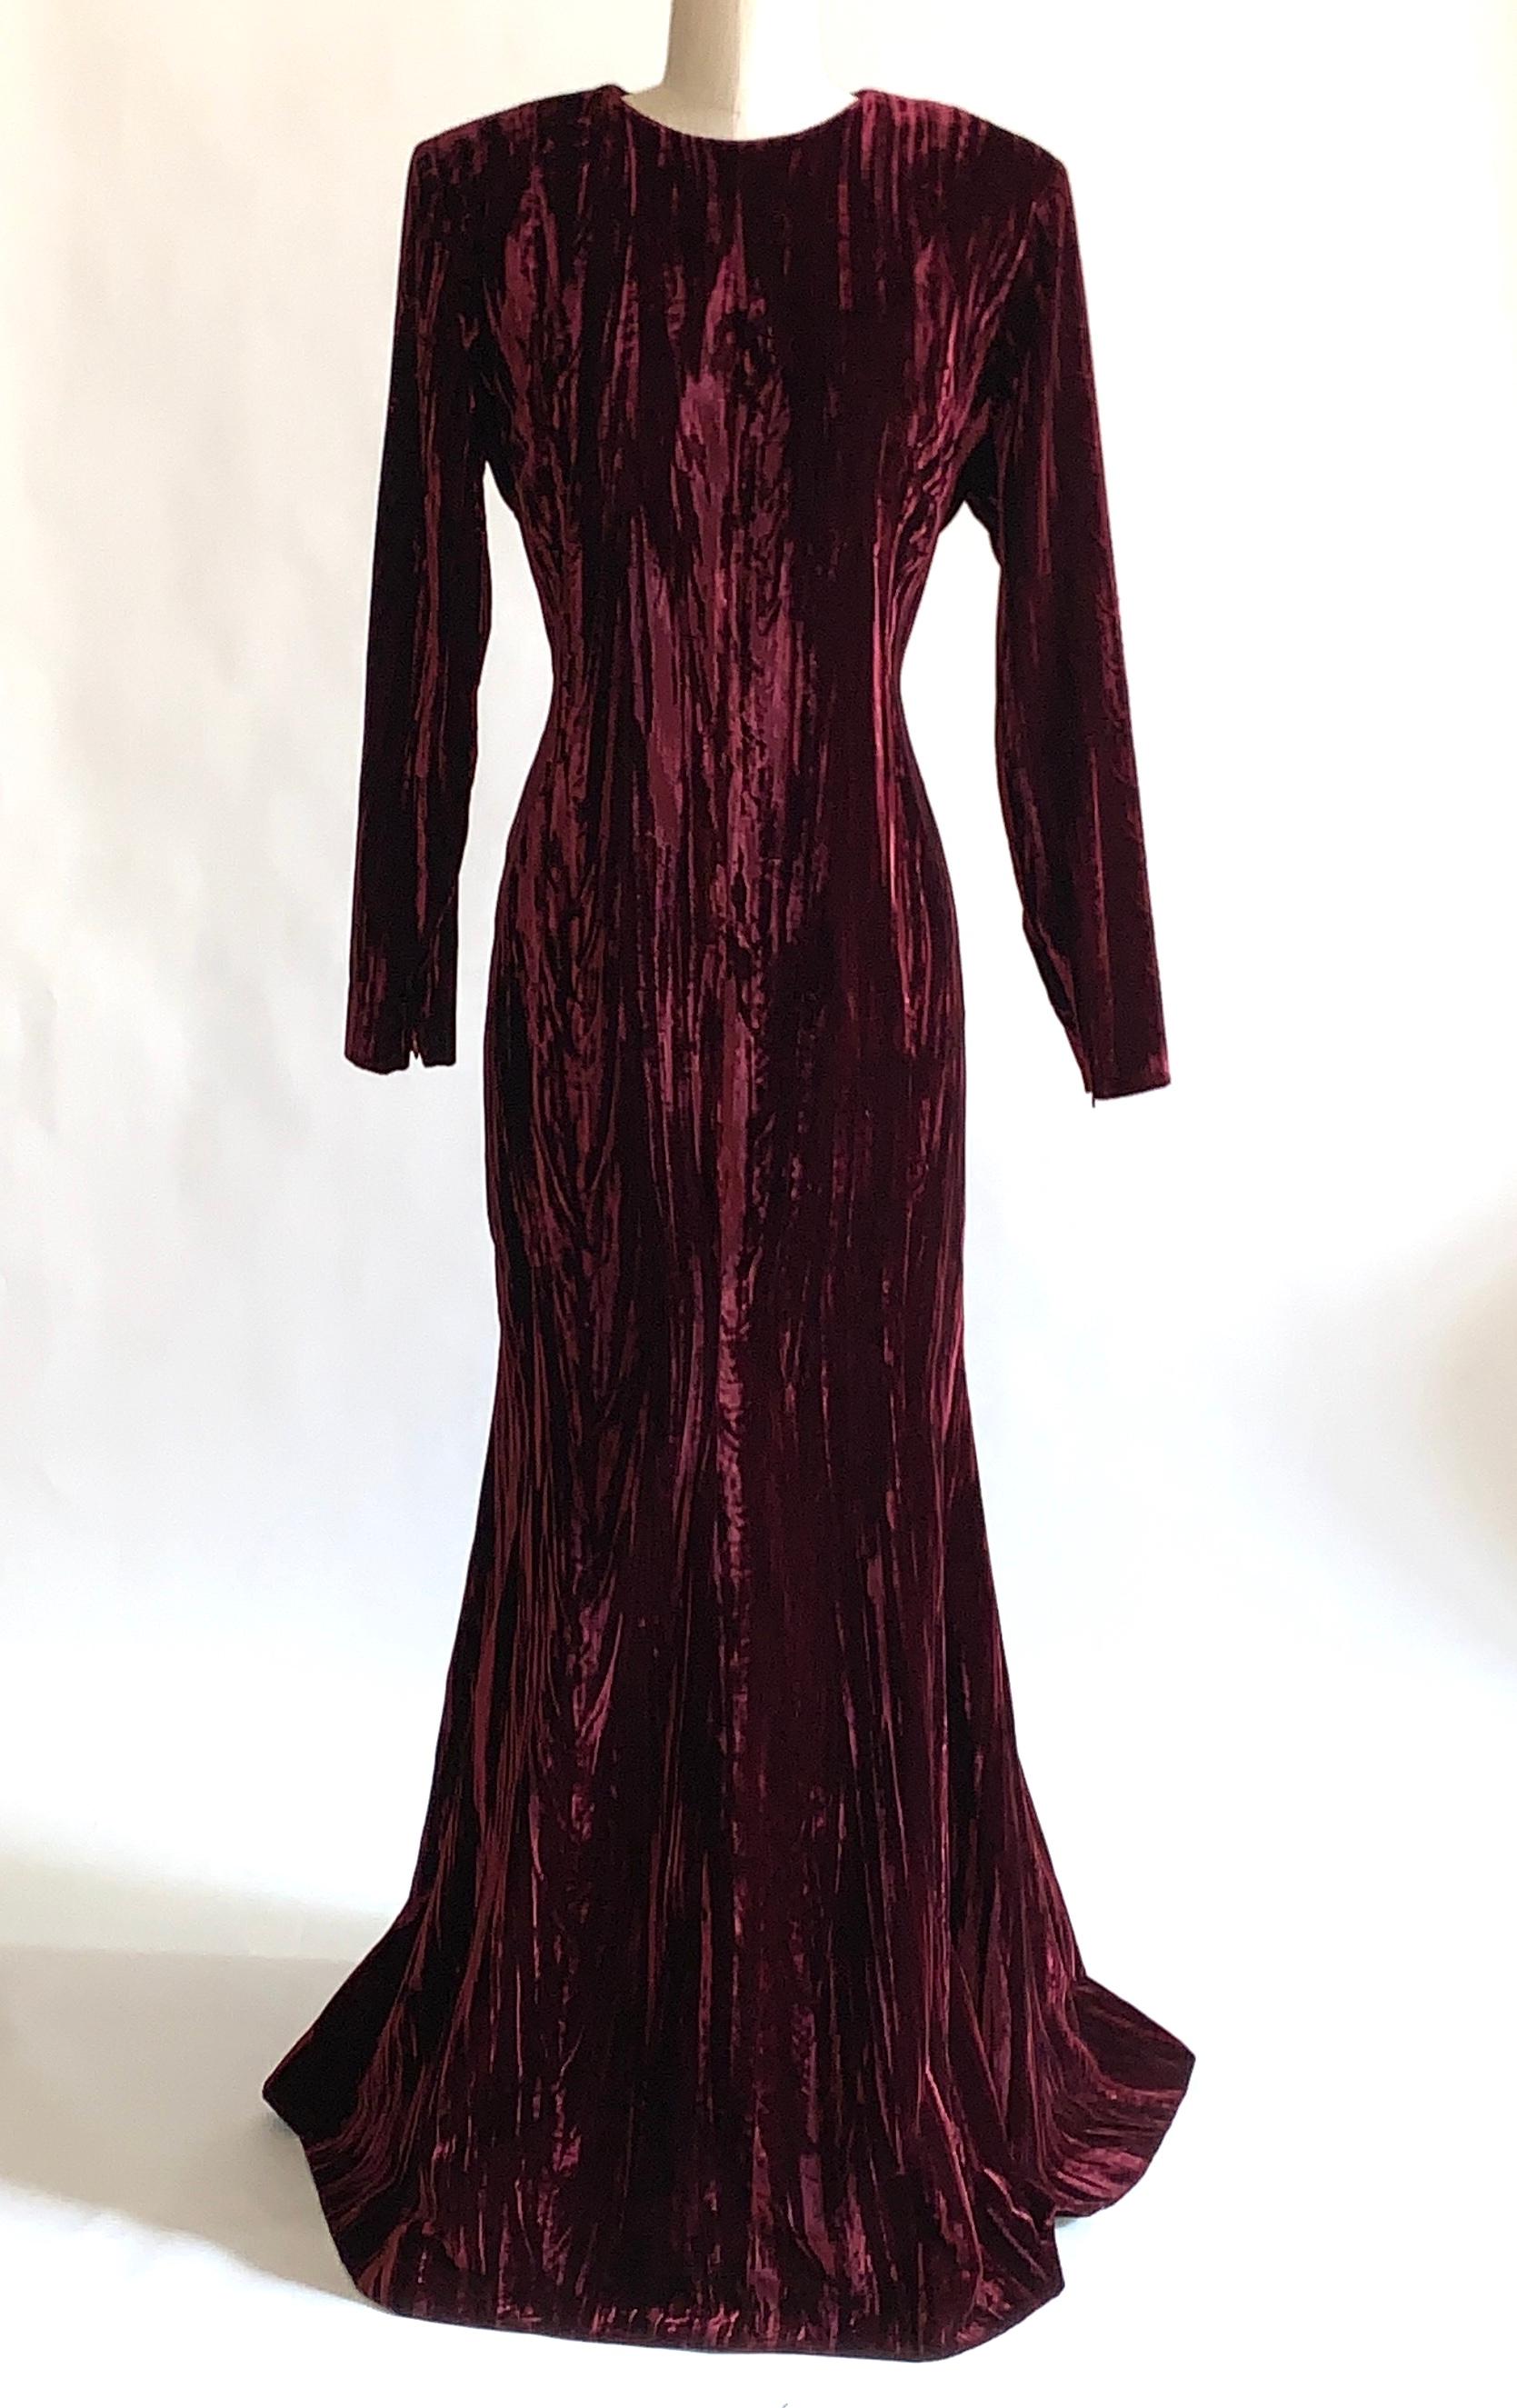 Vintage Yves Saint Laurent Rive Gauche burgundy velvet dress, circa 1980s/90s. Textured velvet with a sort of moire pattern. Long sleeve, fitted through the body with a slight flare at skirt. Padding at shoulders. Zippers at wrist ensure a tailored